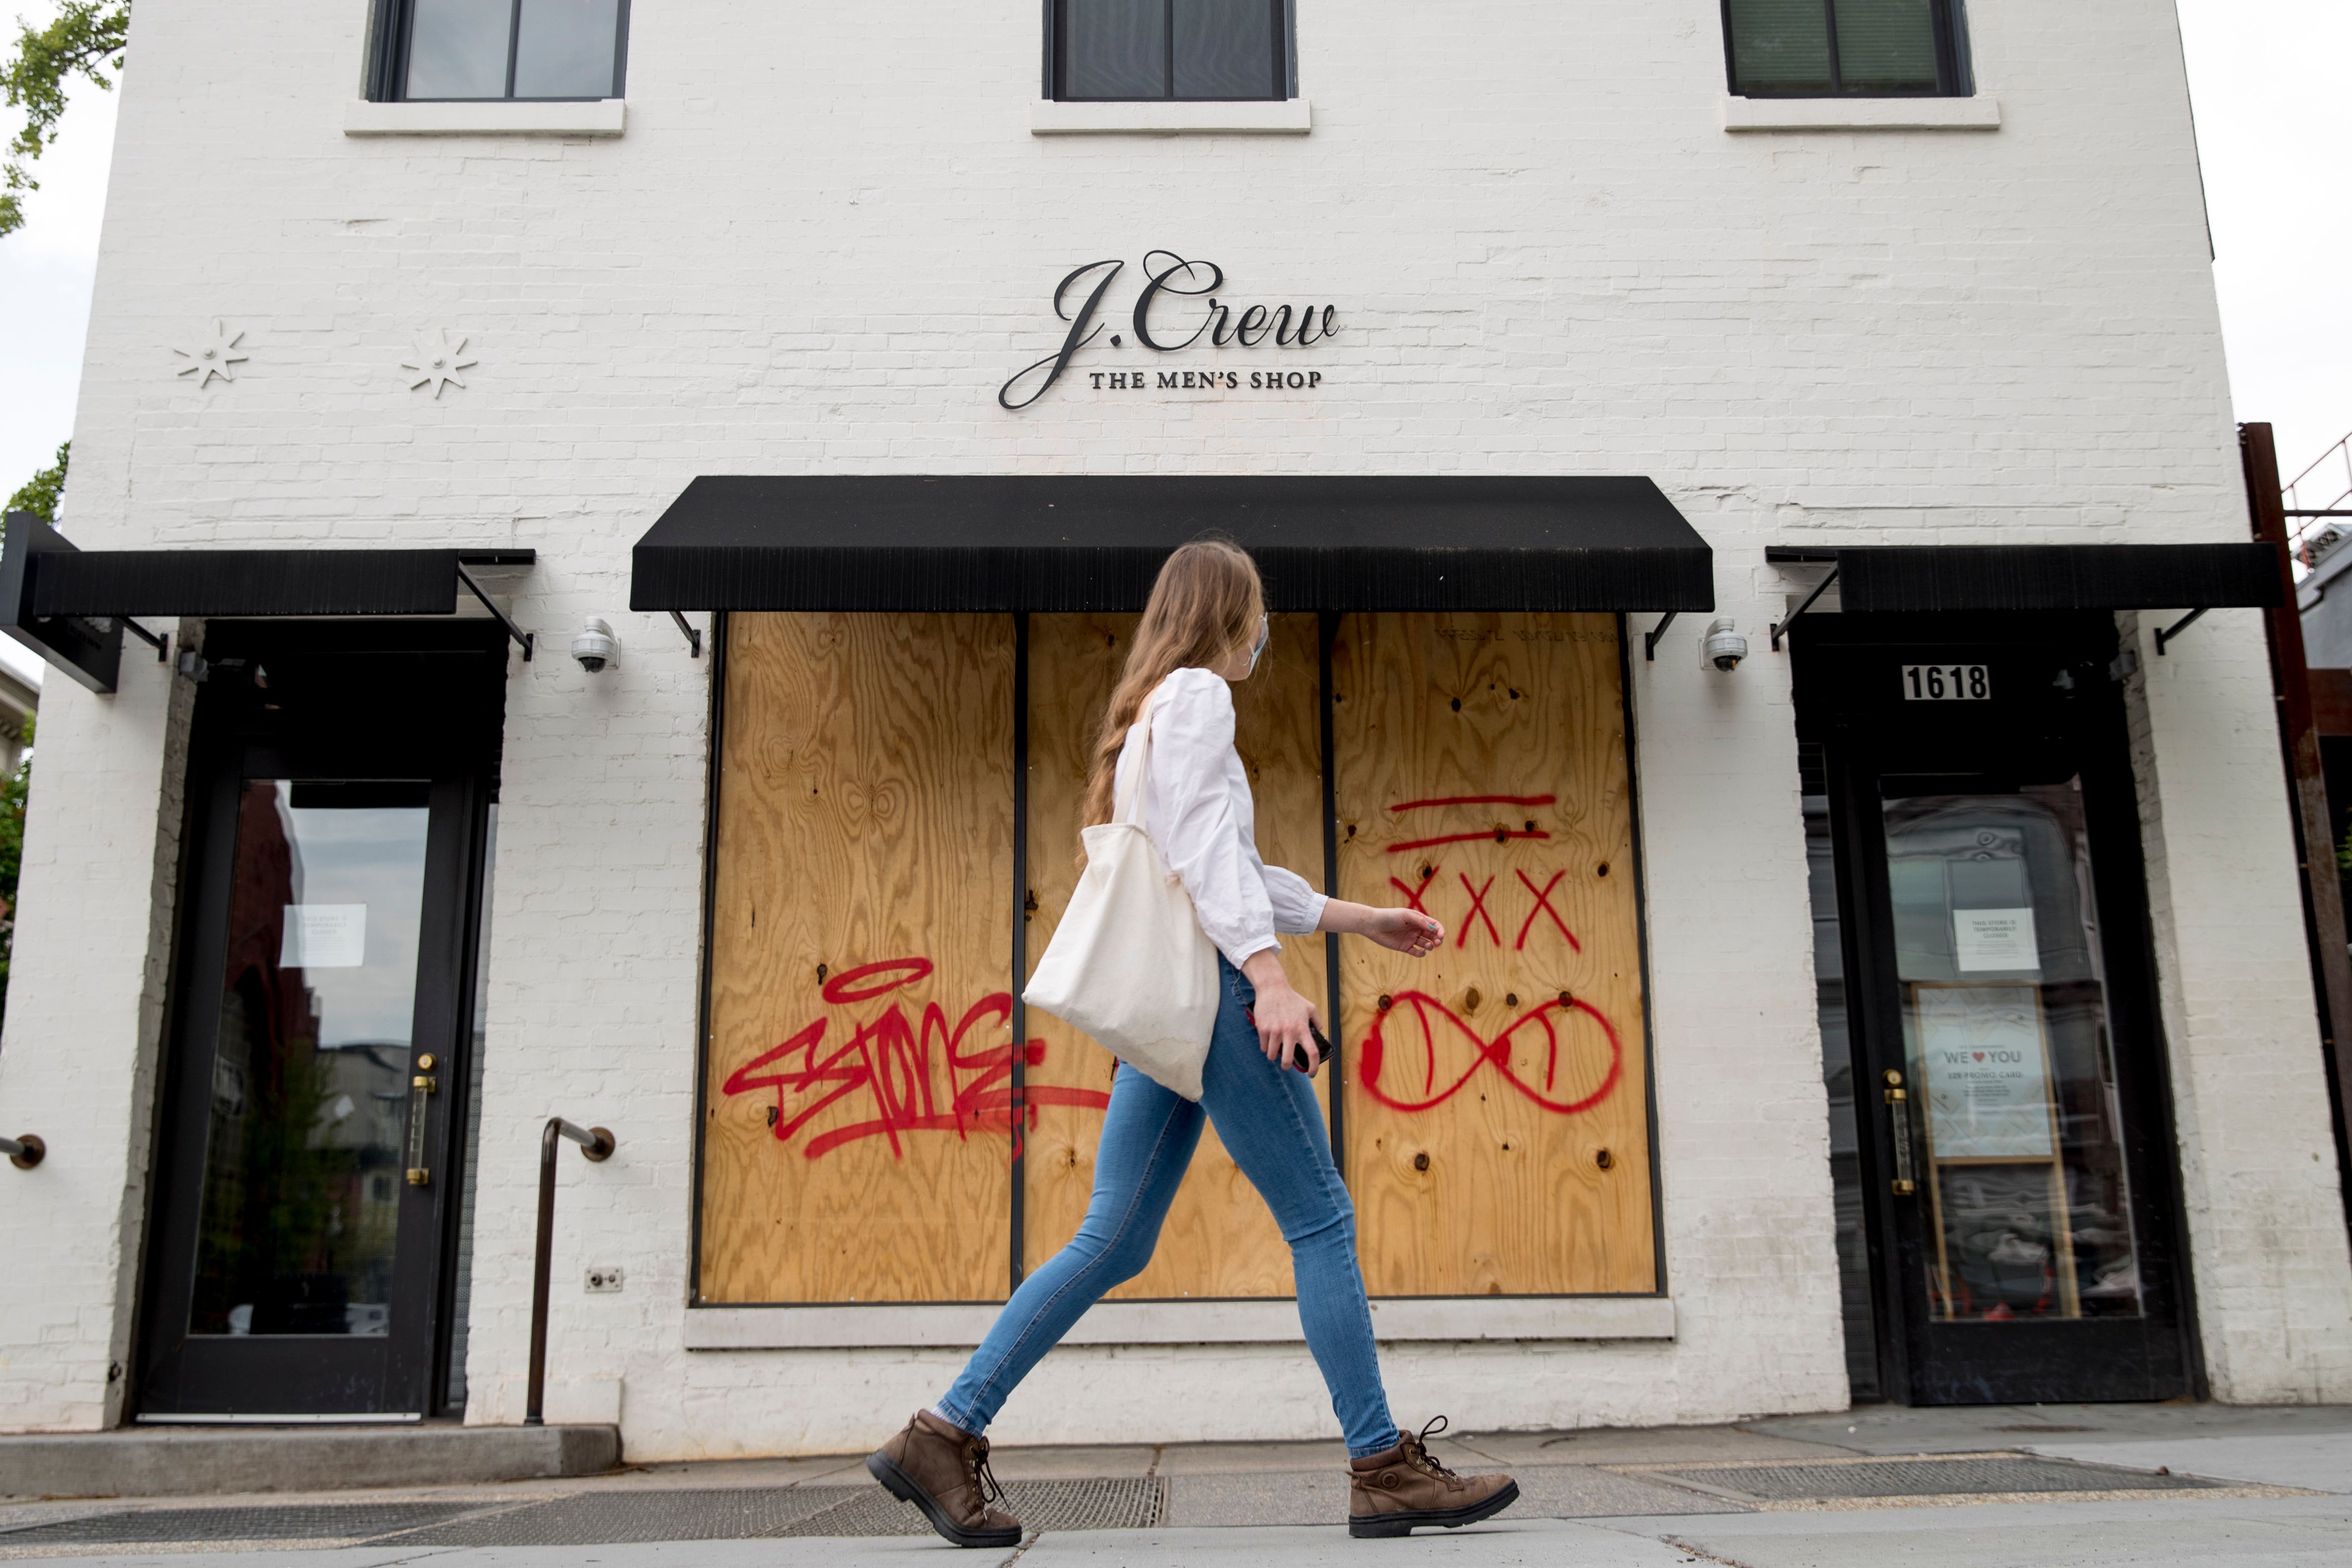 J. Crew files for bankruptcy in coronavirus pandemic's first big